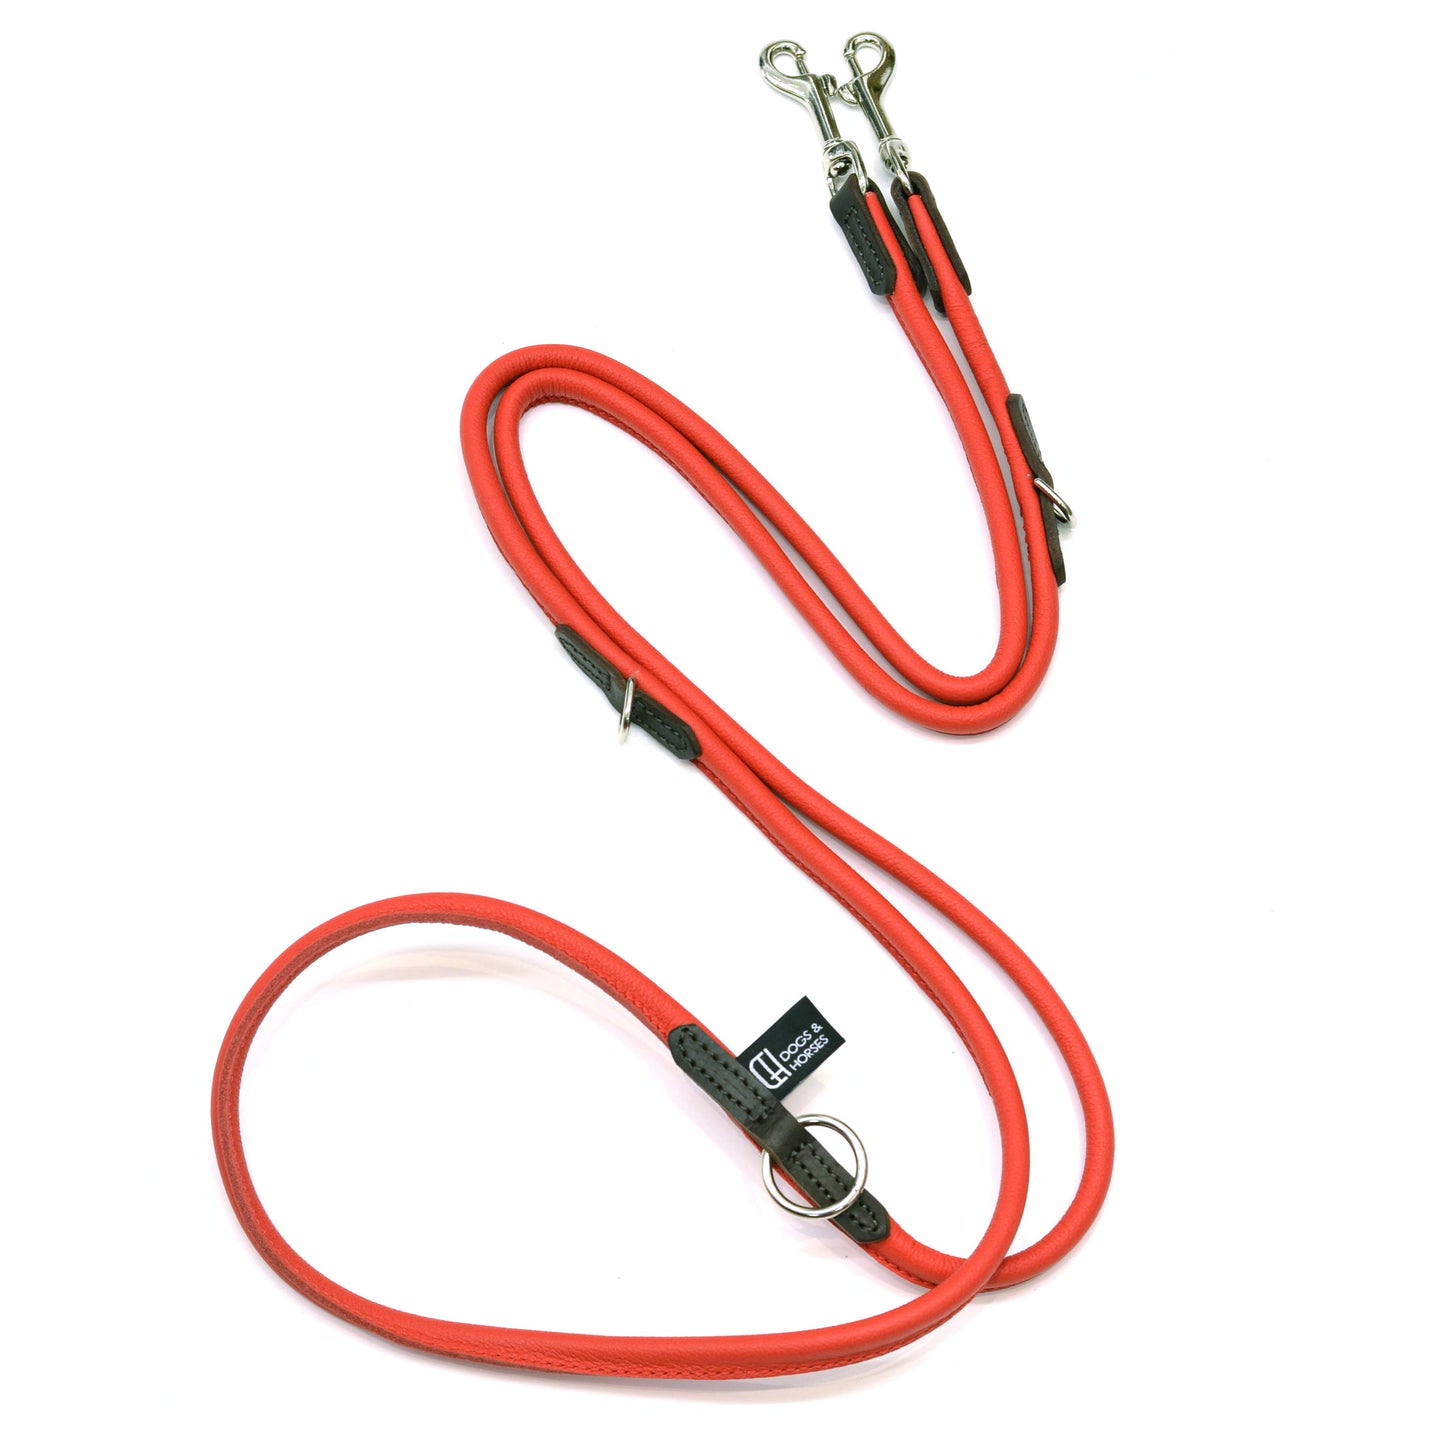 D&H Rolled Soft Leather Adjustable Training Lead